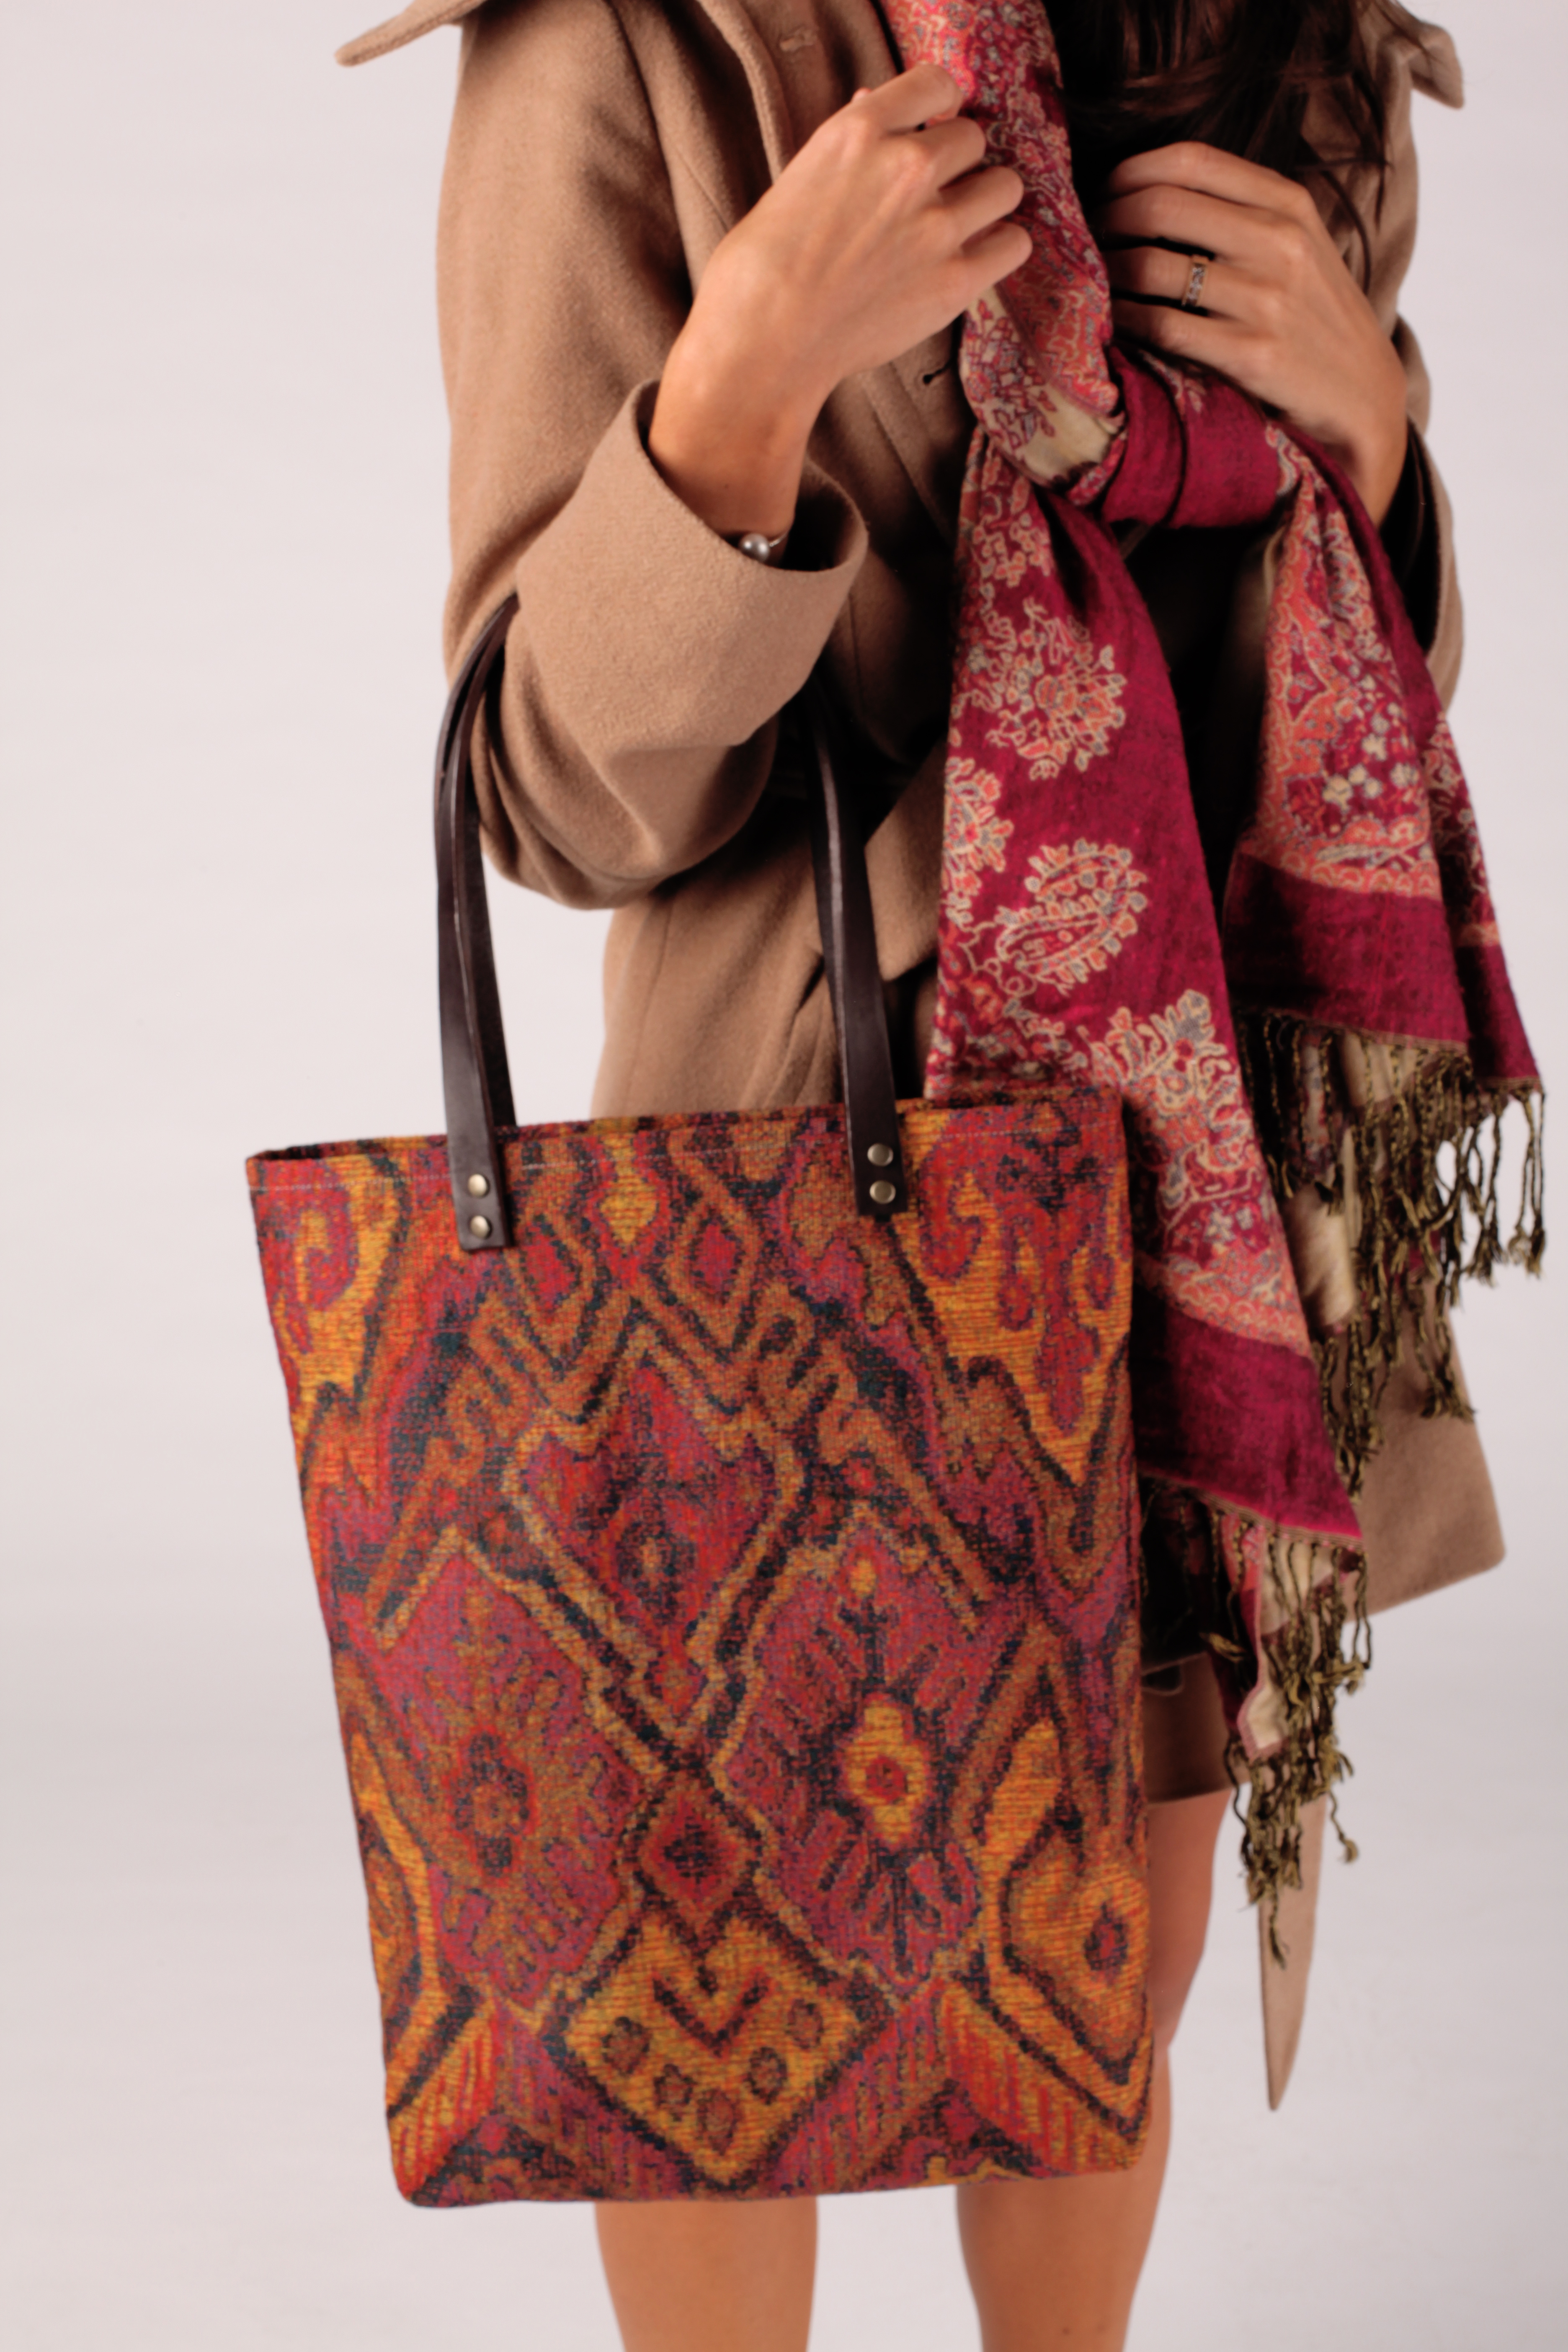 Kilim Canvas Tote Bag with Genuine Leather Straps – Sewing Projects | BurdaStyle.com